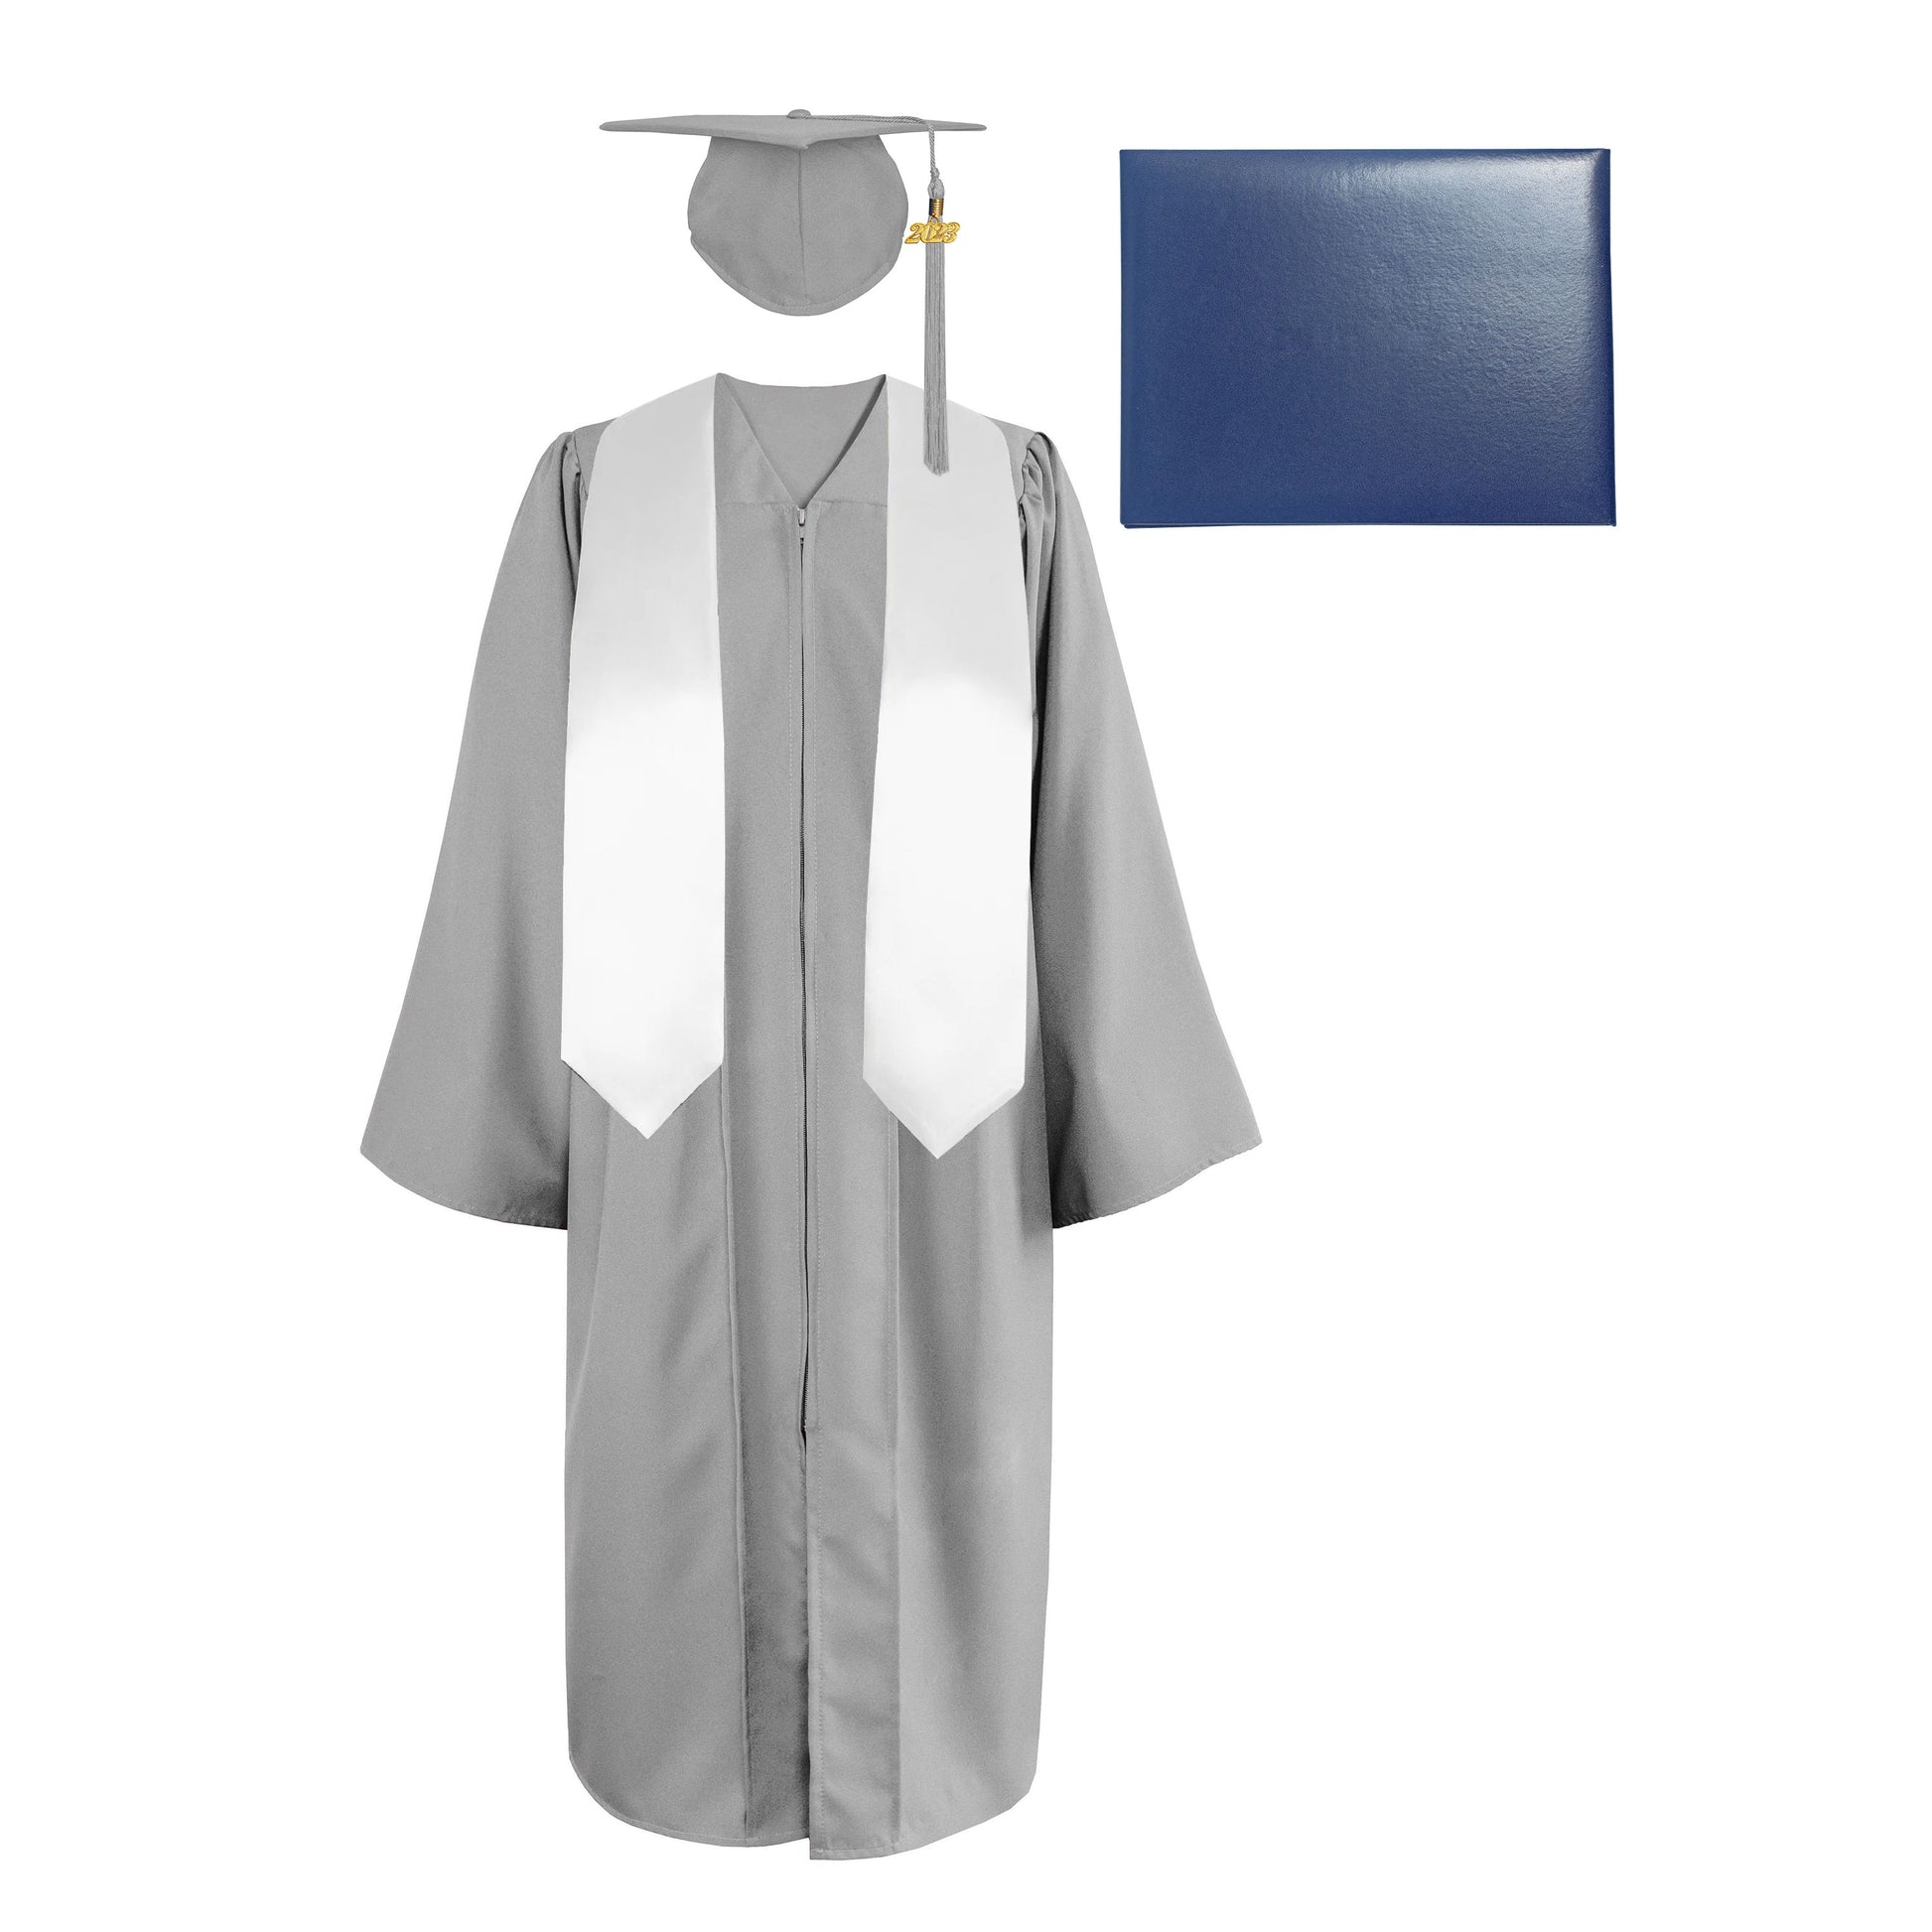 Stole, Cap & Grad Tassel (gown not included) –